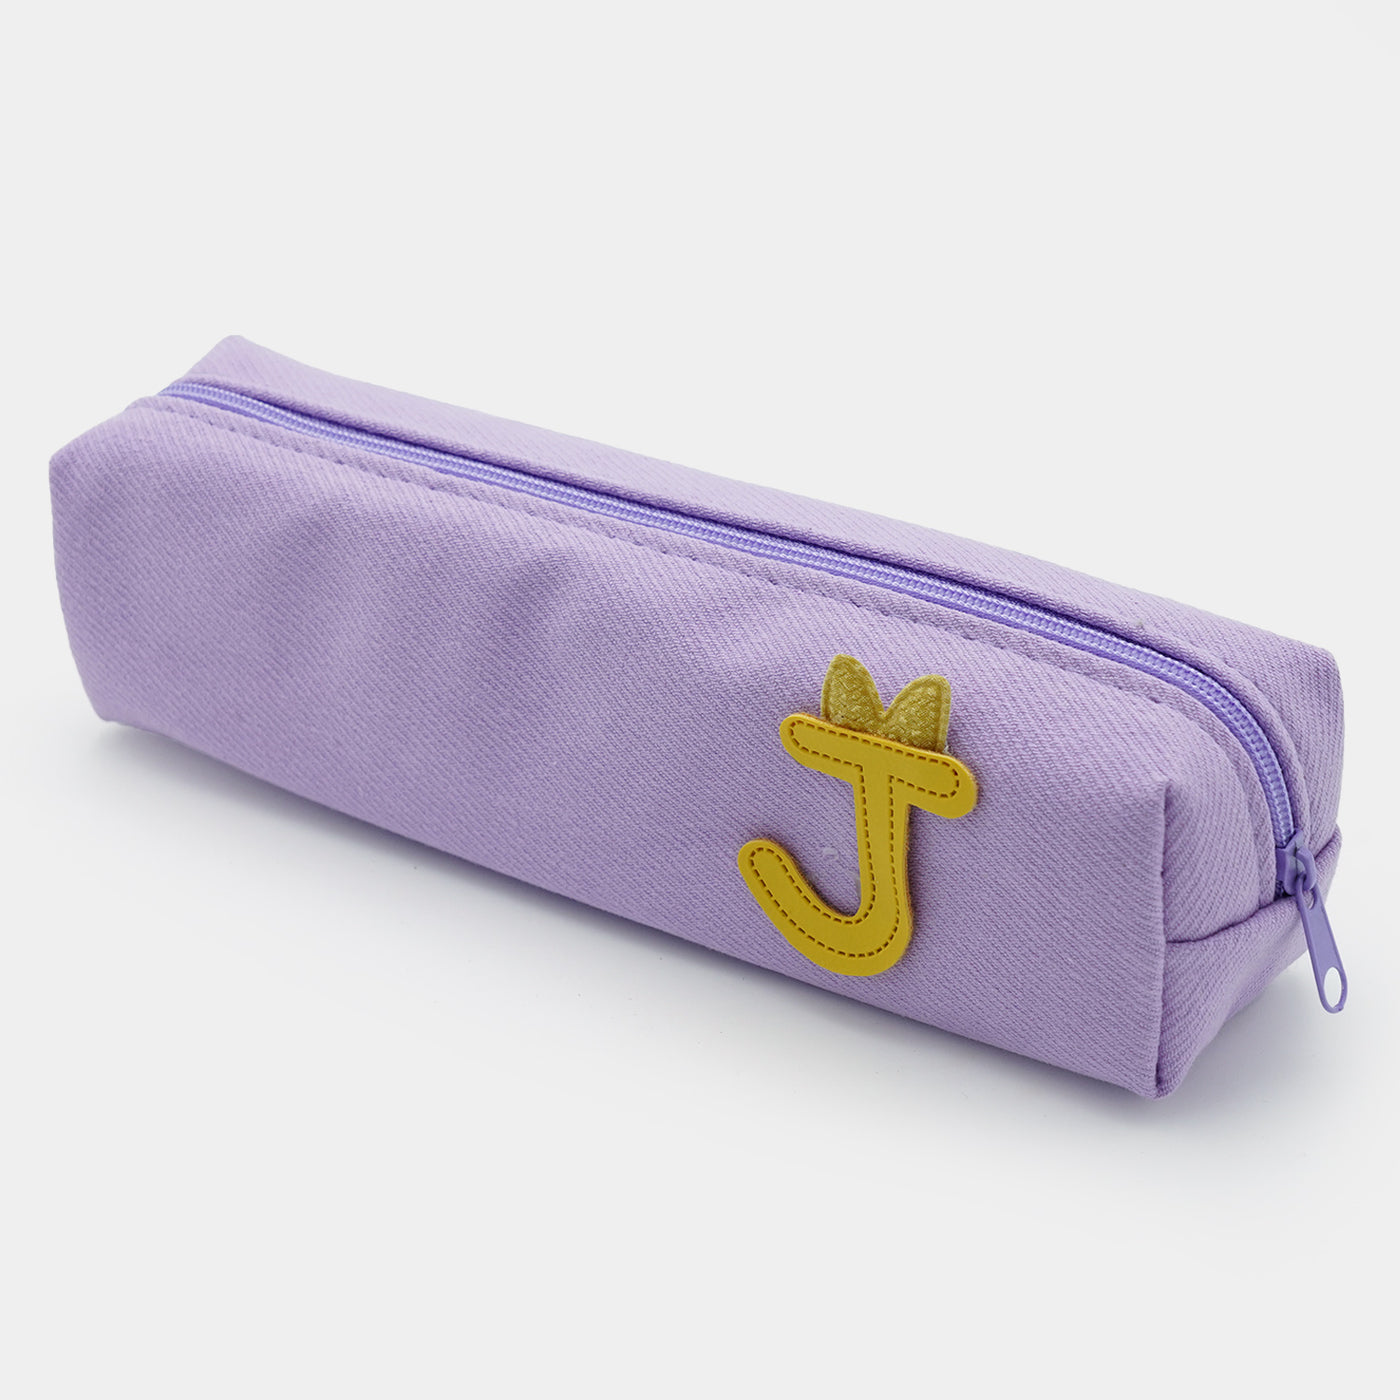 Stylish Pencil Pouch For Kids